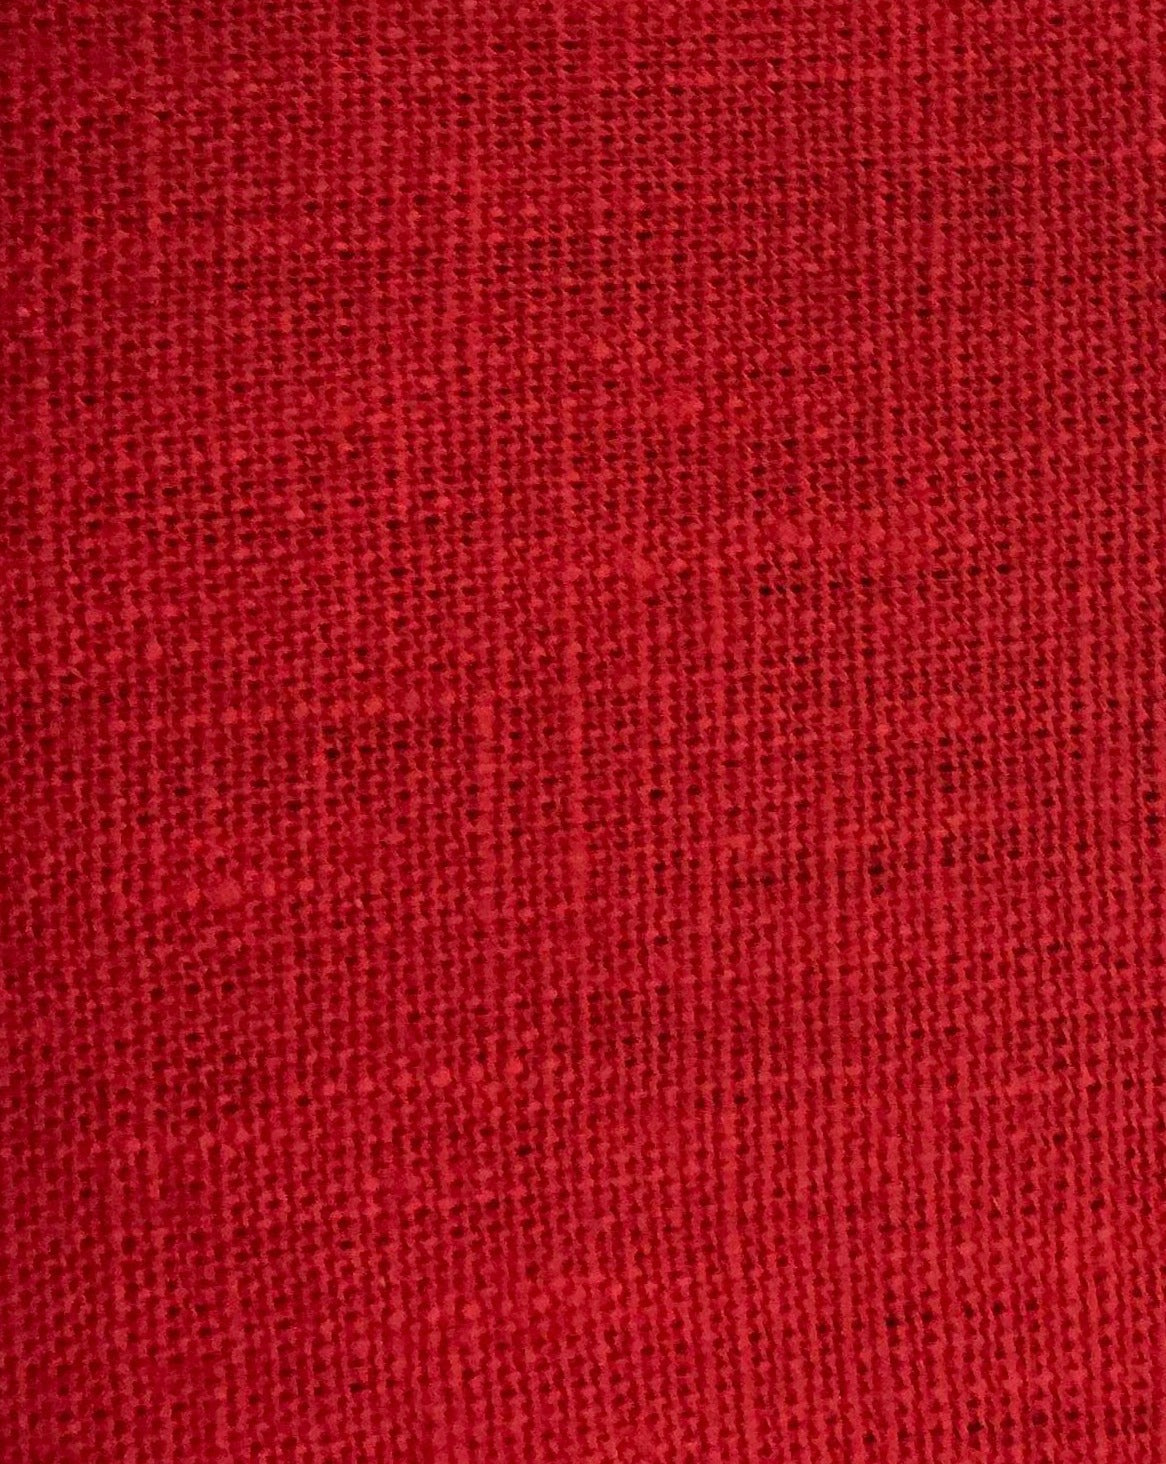 TUSCANY TRUE RED SOFT -(EUROPEAN LINEN) 100% LINEN FABRICS 7.5 OZ . DYED & FINISHED IN USA